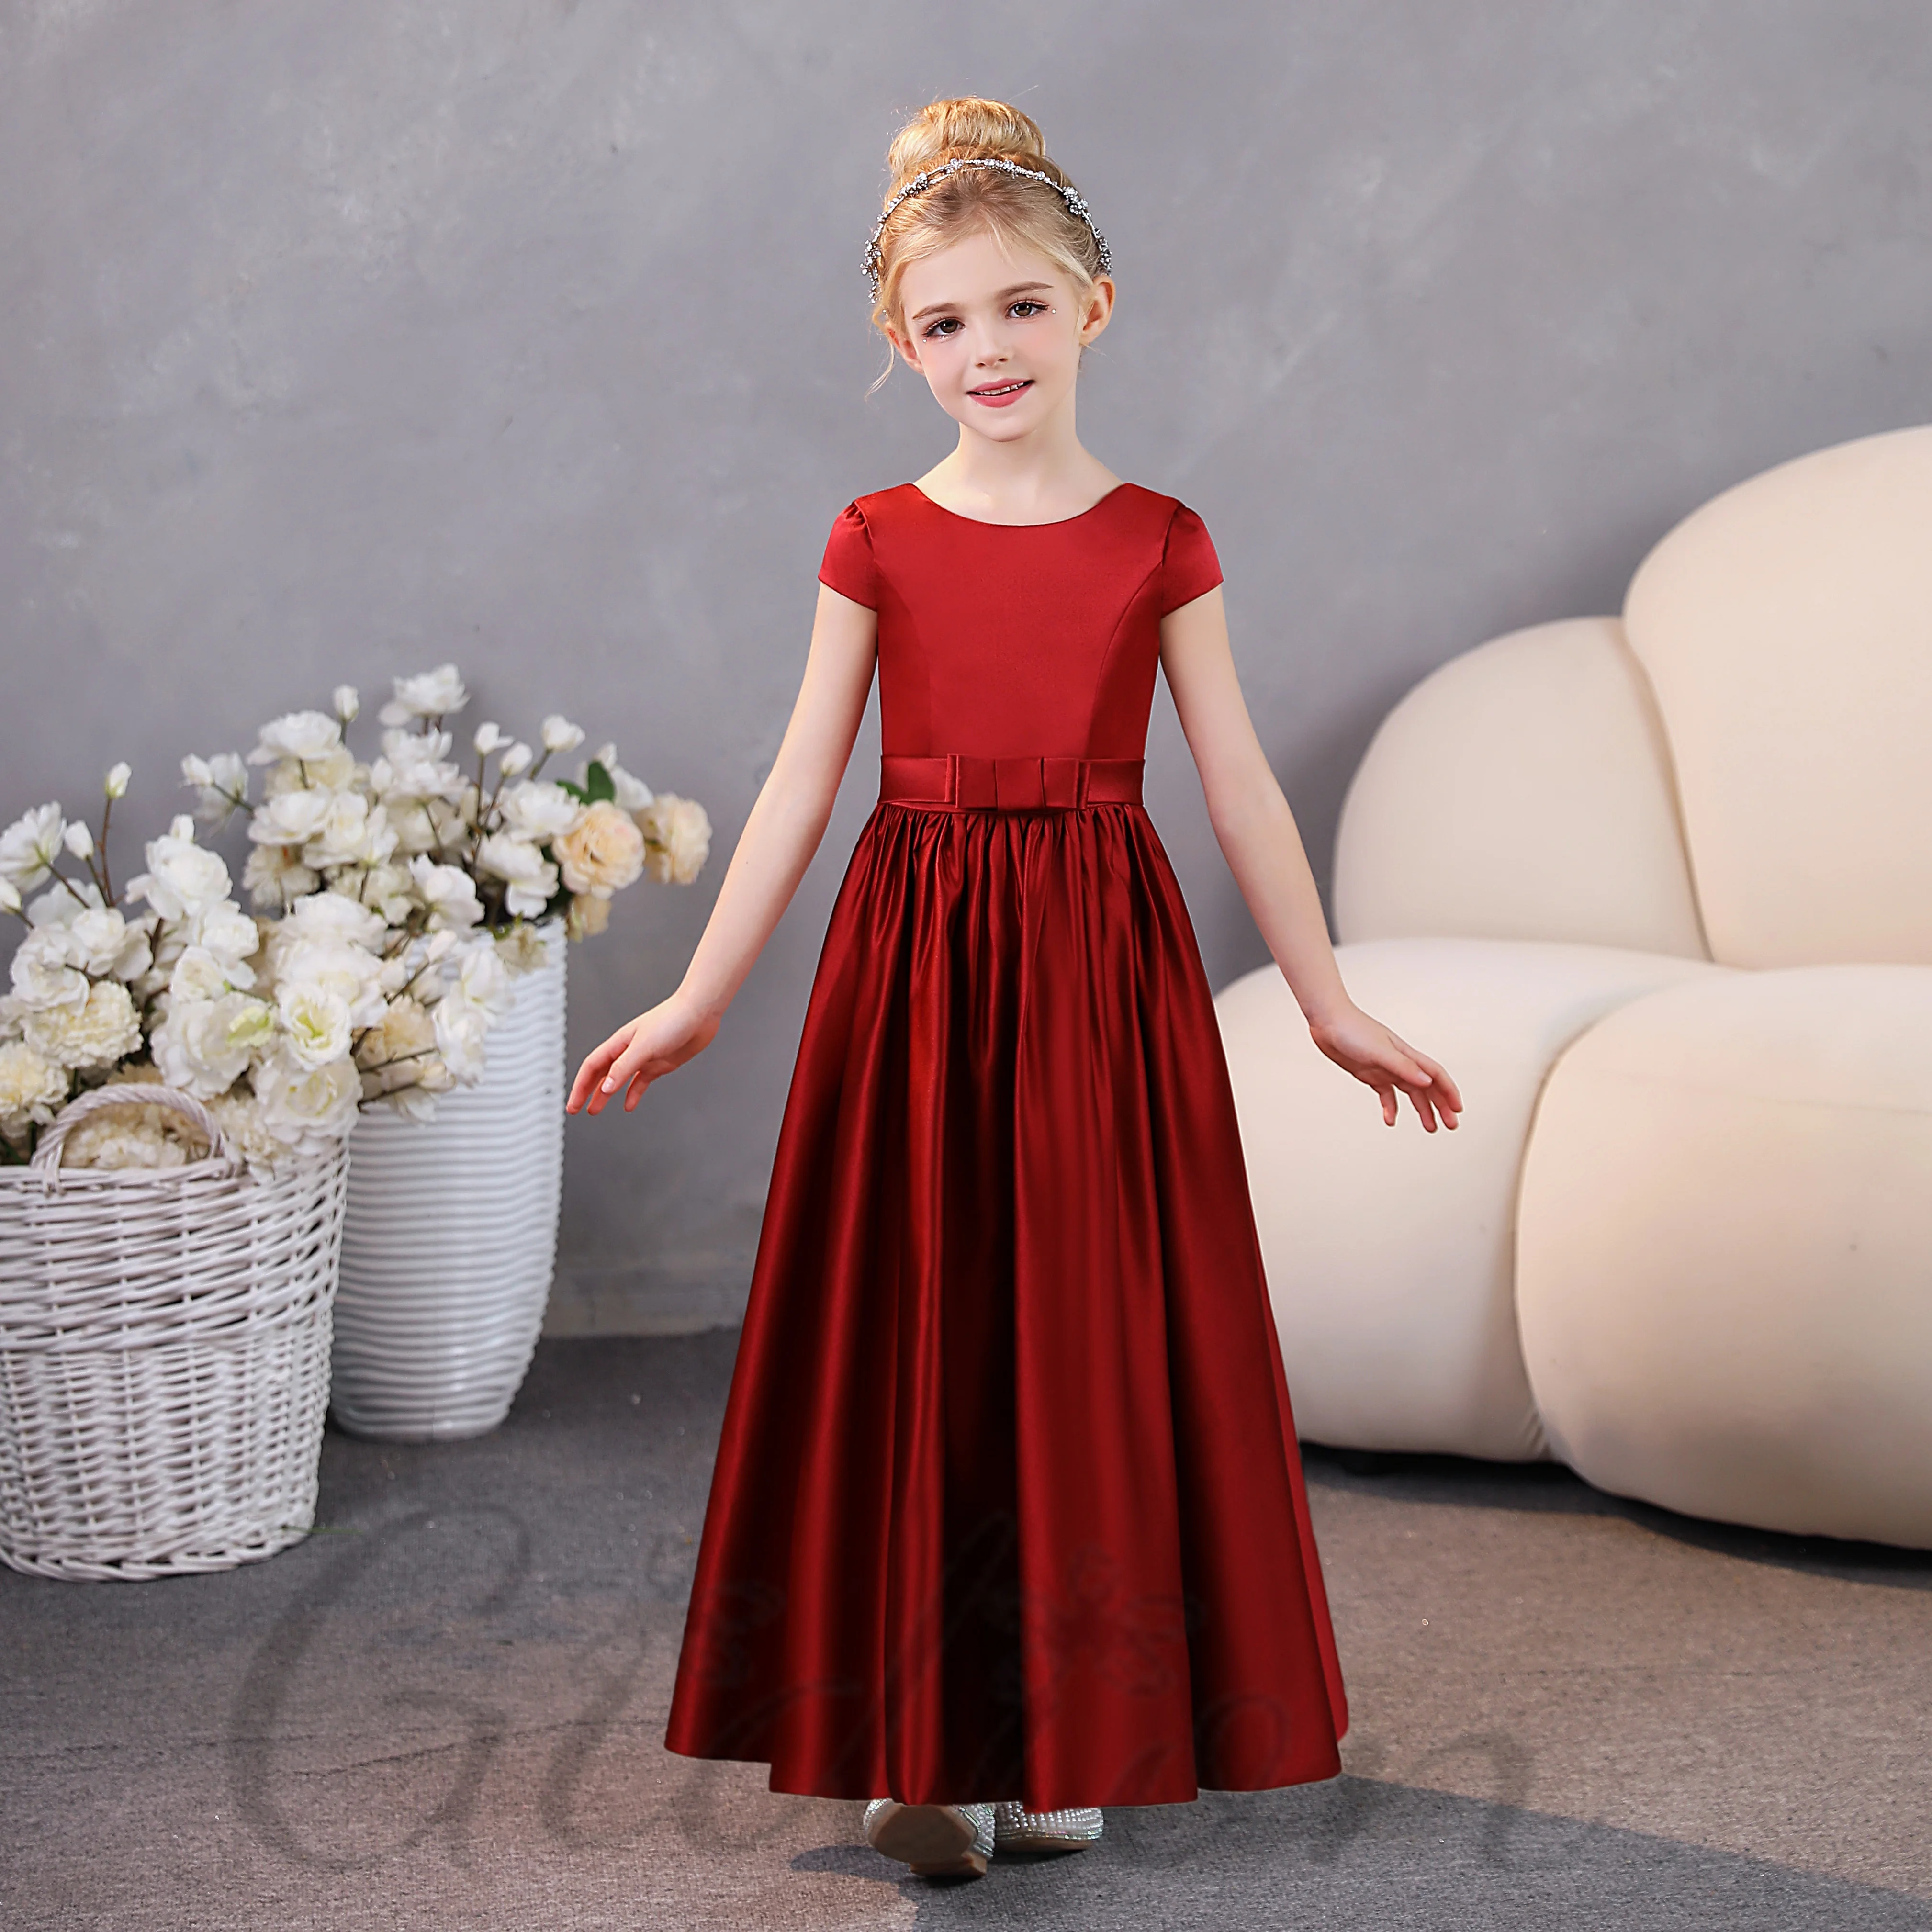 

Satin Junior Bridesmaid Dresss For Kids Wedding Ceremony Prom Night Pageant Banquet Festivity Celebration Party Ball Gown Event